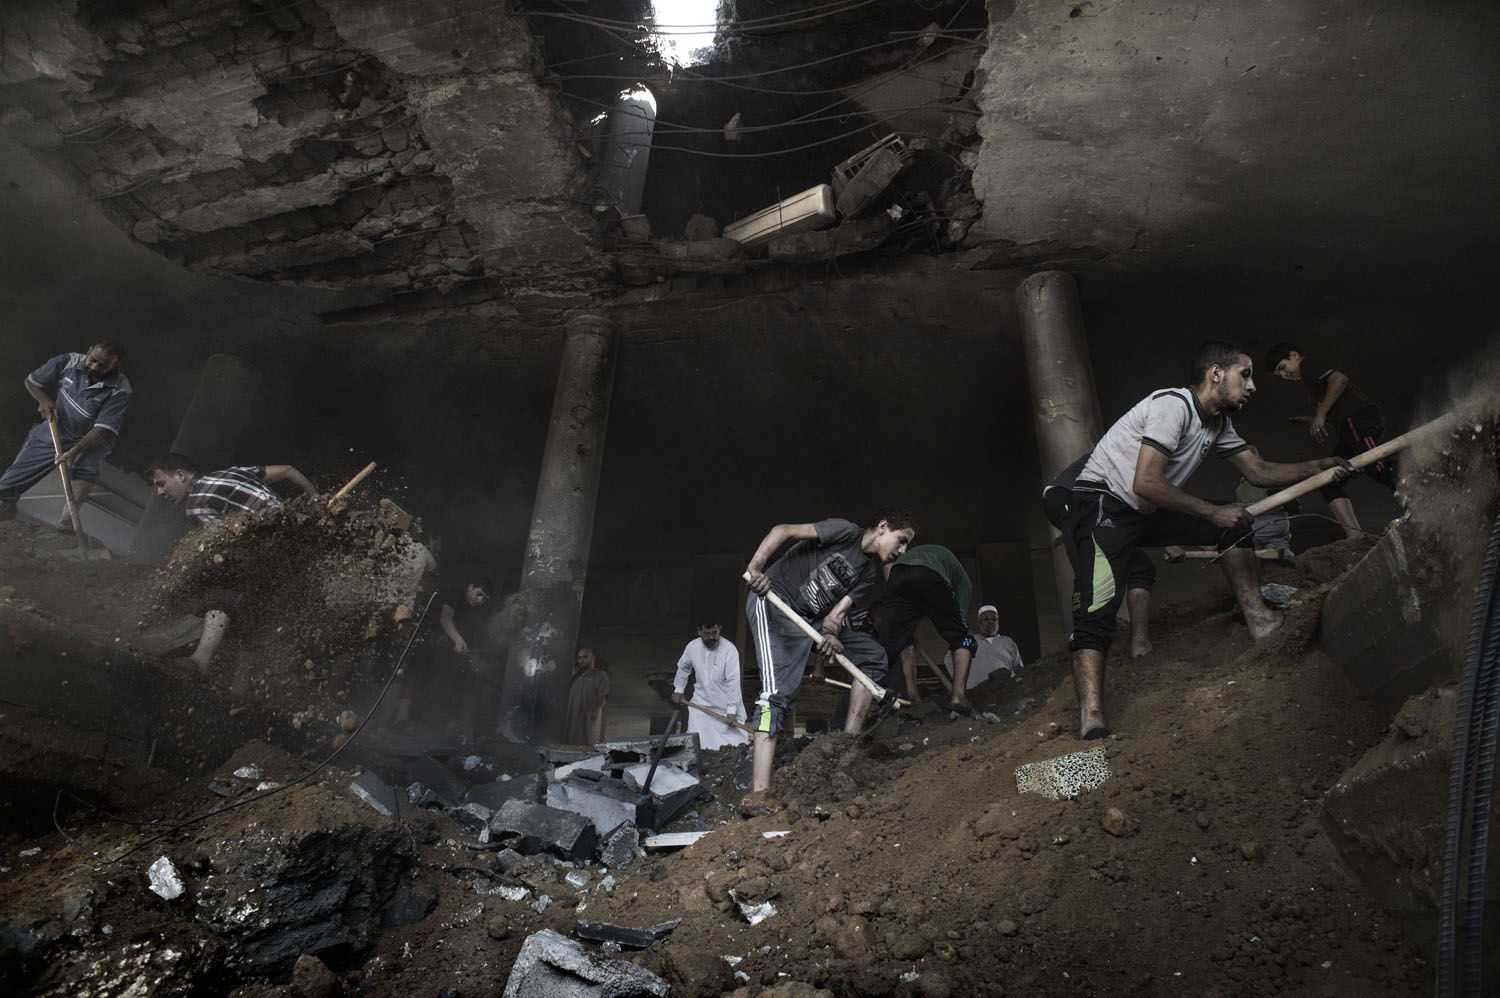 Aug. 9, 2014. Palestinians remove rubble in Martyr Imam Hassan al-banna mosque in Zeitoun neighborhood in Gaza City, following an overnight airstrike.